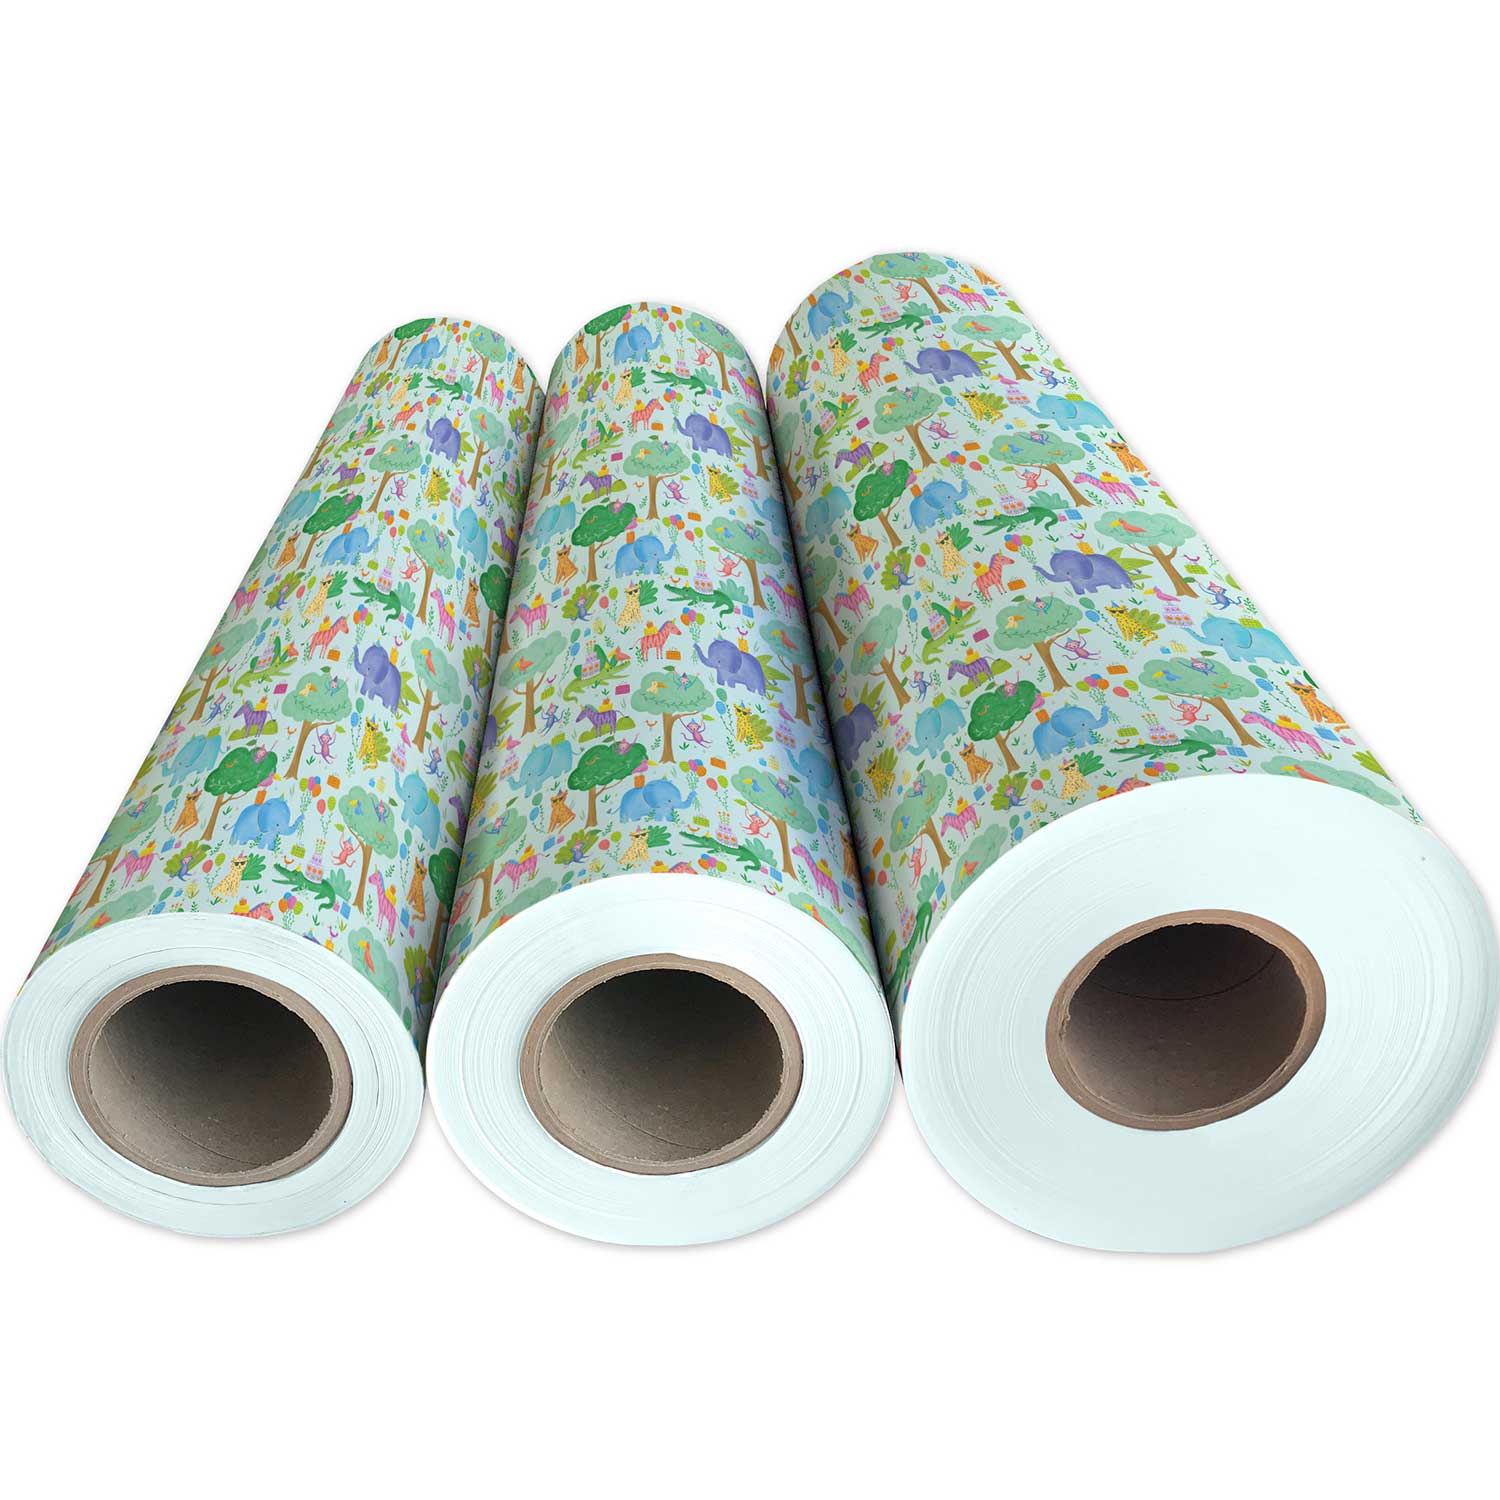 B328g Jungle Party Birthday Gift Wrapping Paper 3 Reams 